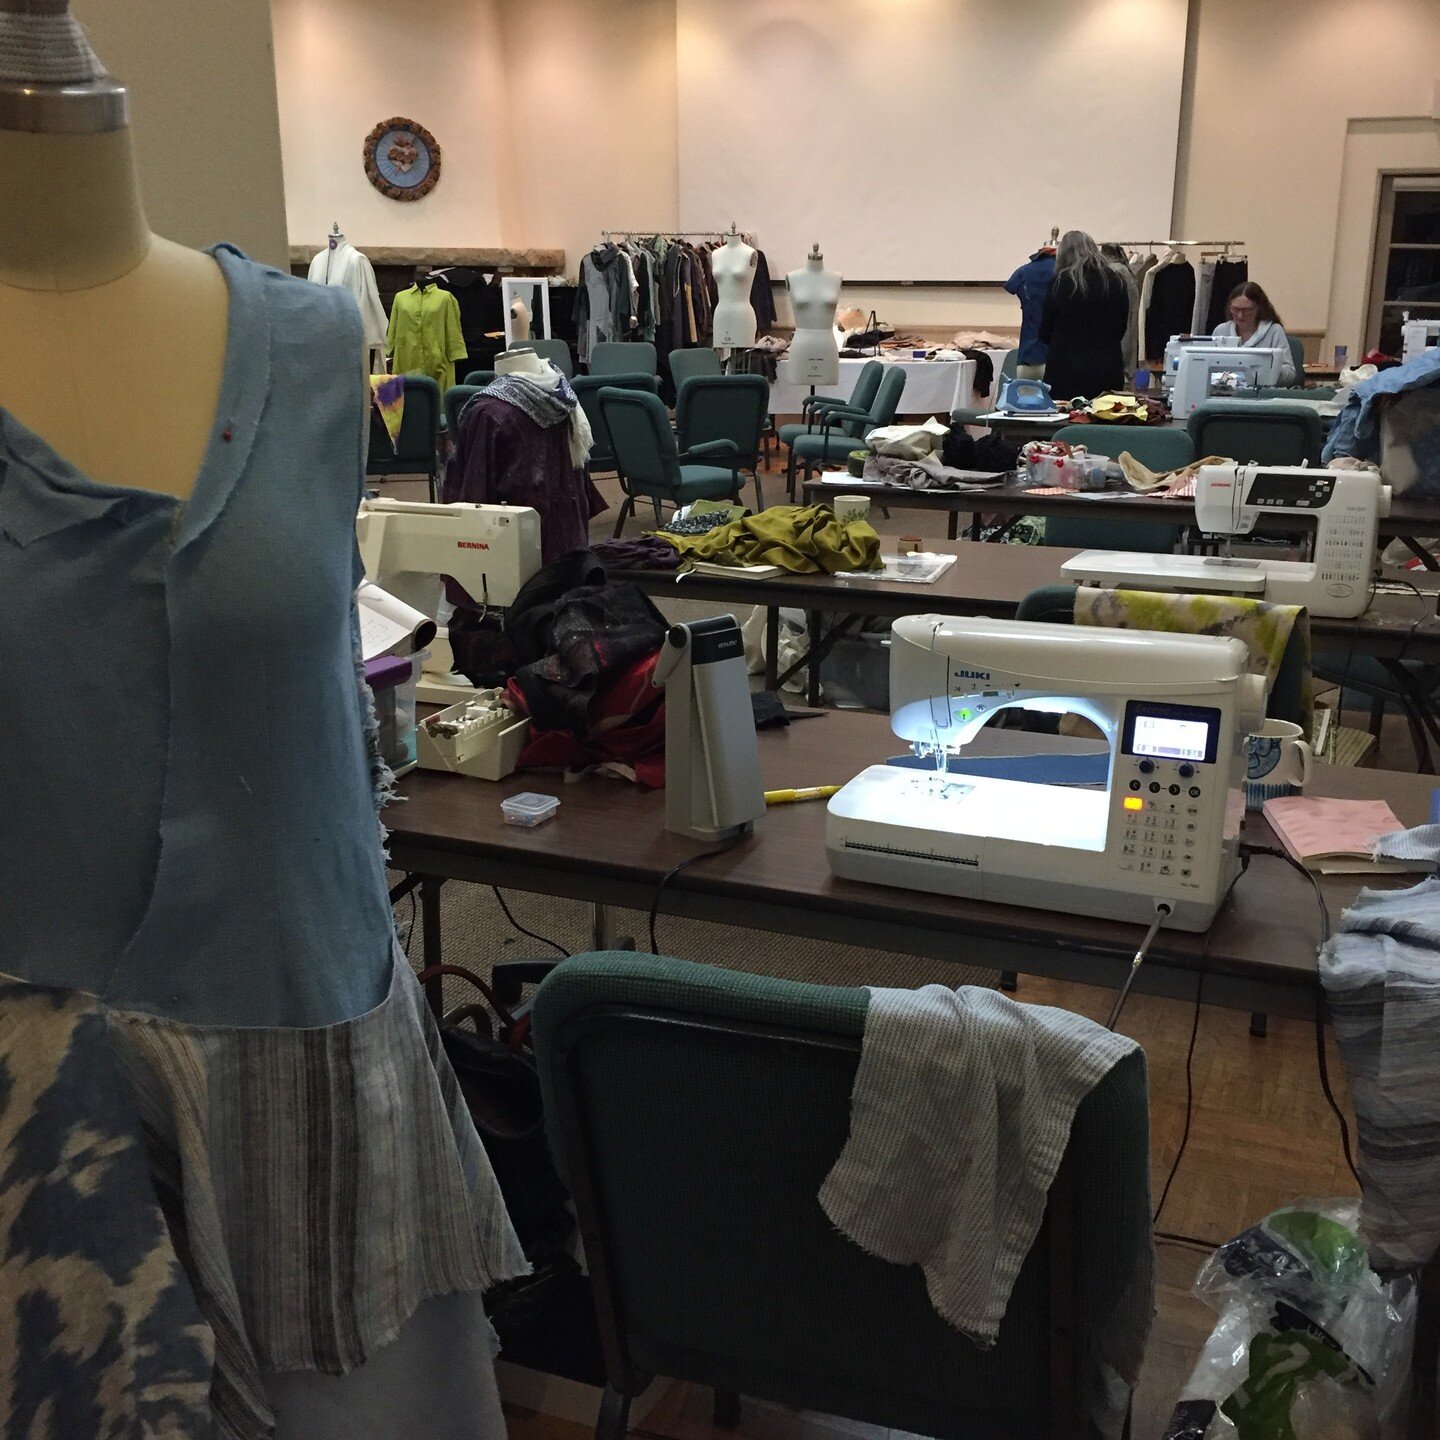 Looking forward to spending time with the Verde Valley Weaving and Spinners Guild as we do a wardrobe refresh workshop: The Alchemy of ReMaking. 

#karenlukacs #sustainablefashion #remakinggarments #transformingfashion #upcylefashion #sewingretreat #